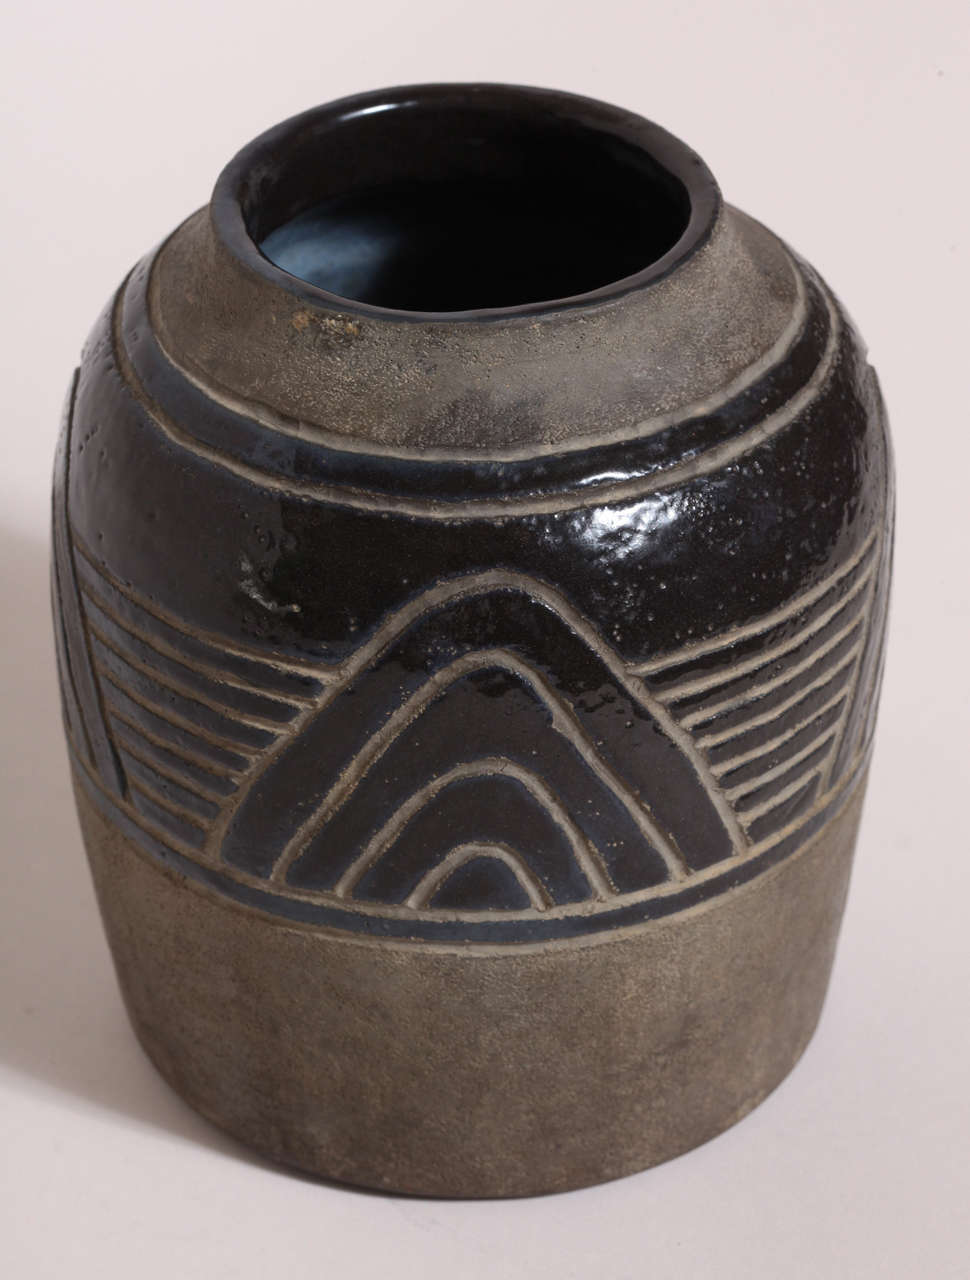 A cylindrical stoneware vase partially glazed black with an incised geometric design.
Signed: H Sim.

(Price shown is reduced price, no further trade discount) 